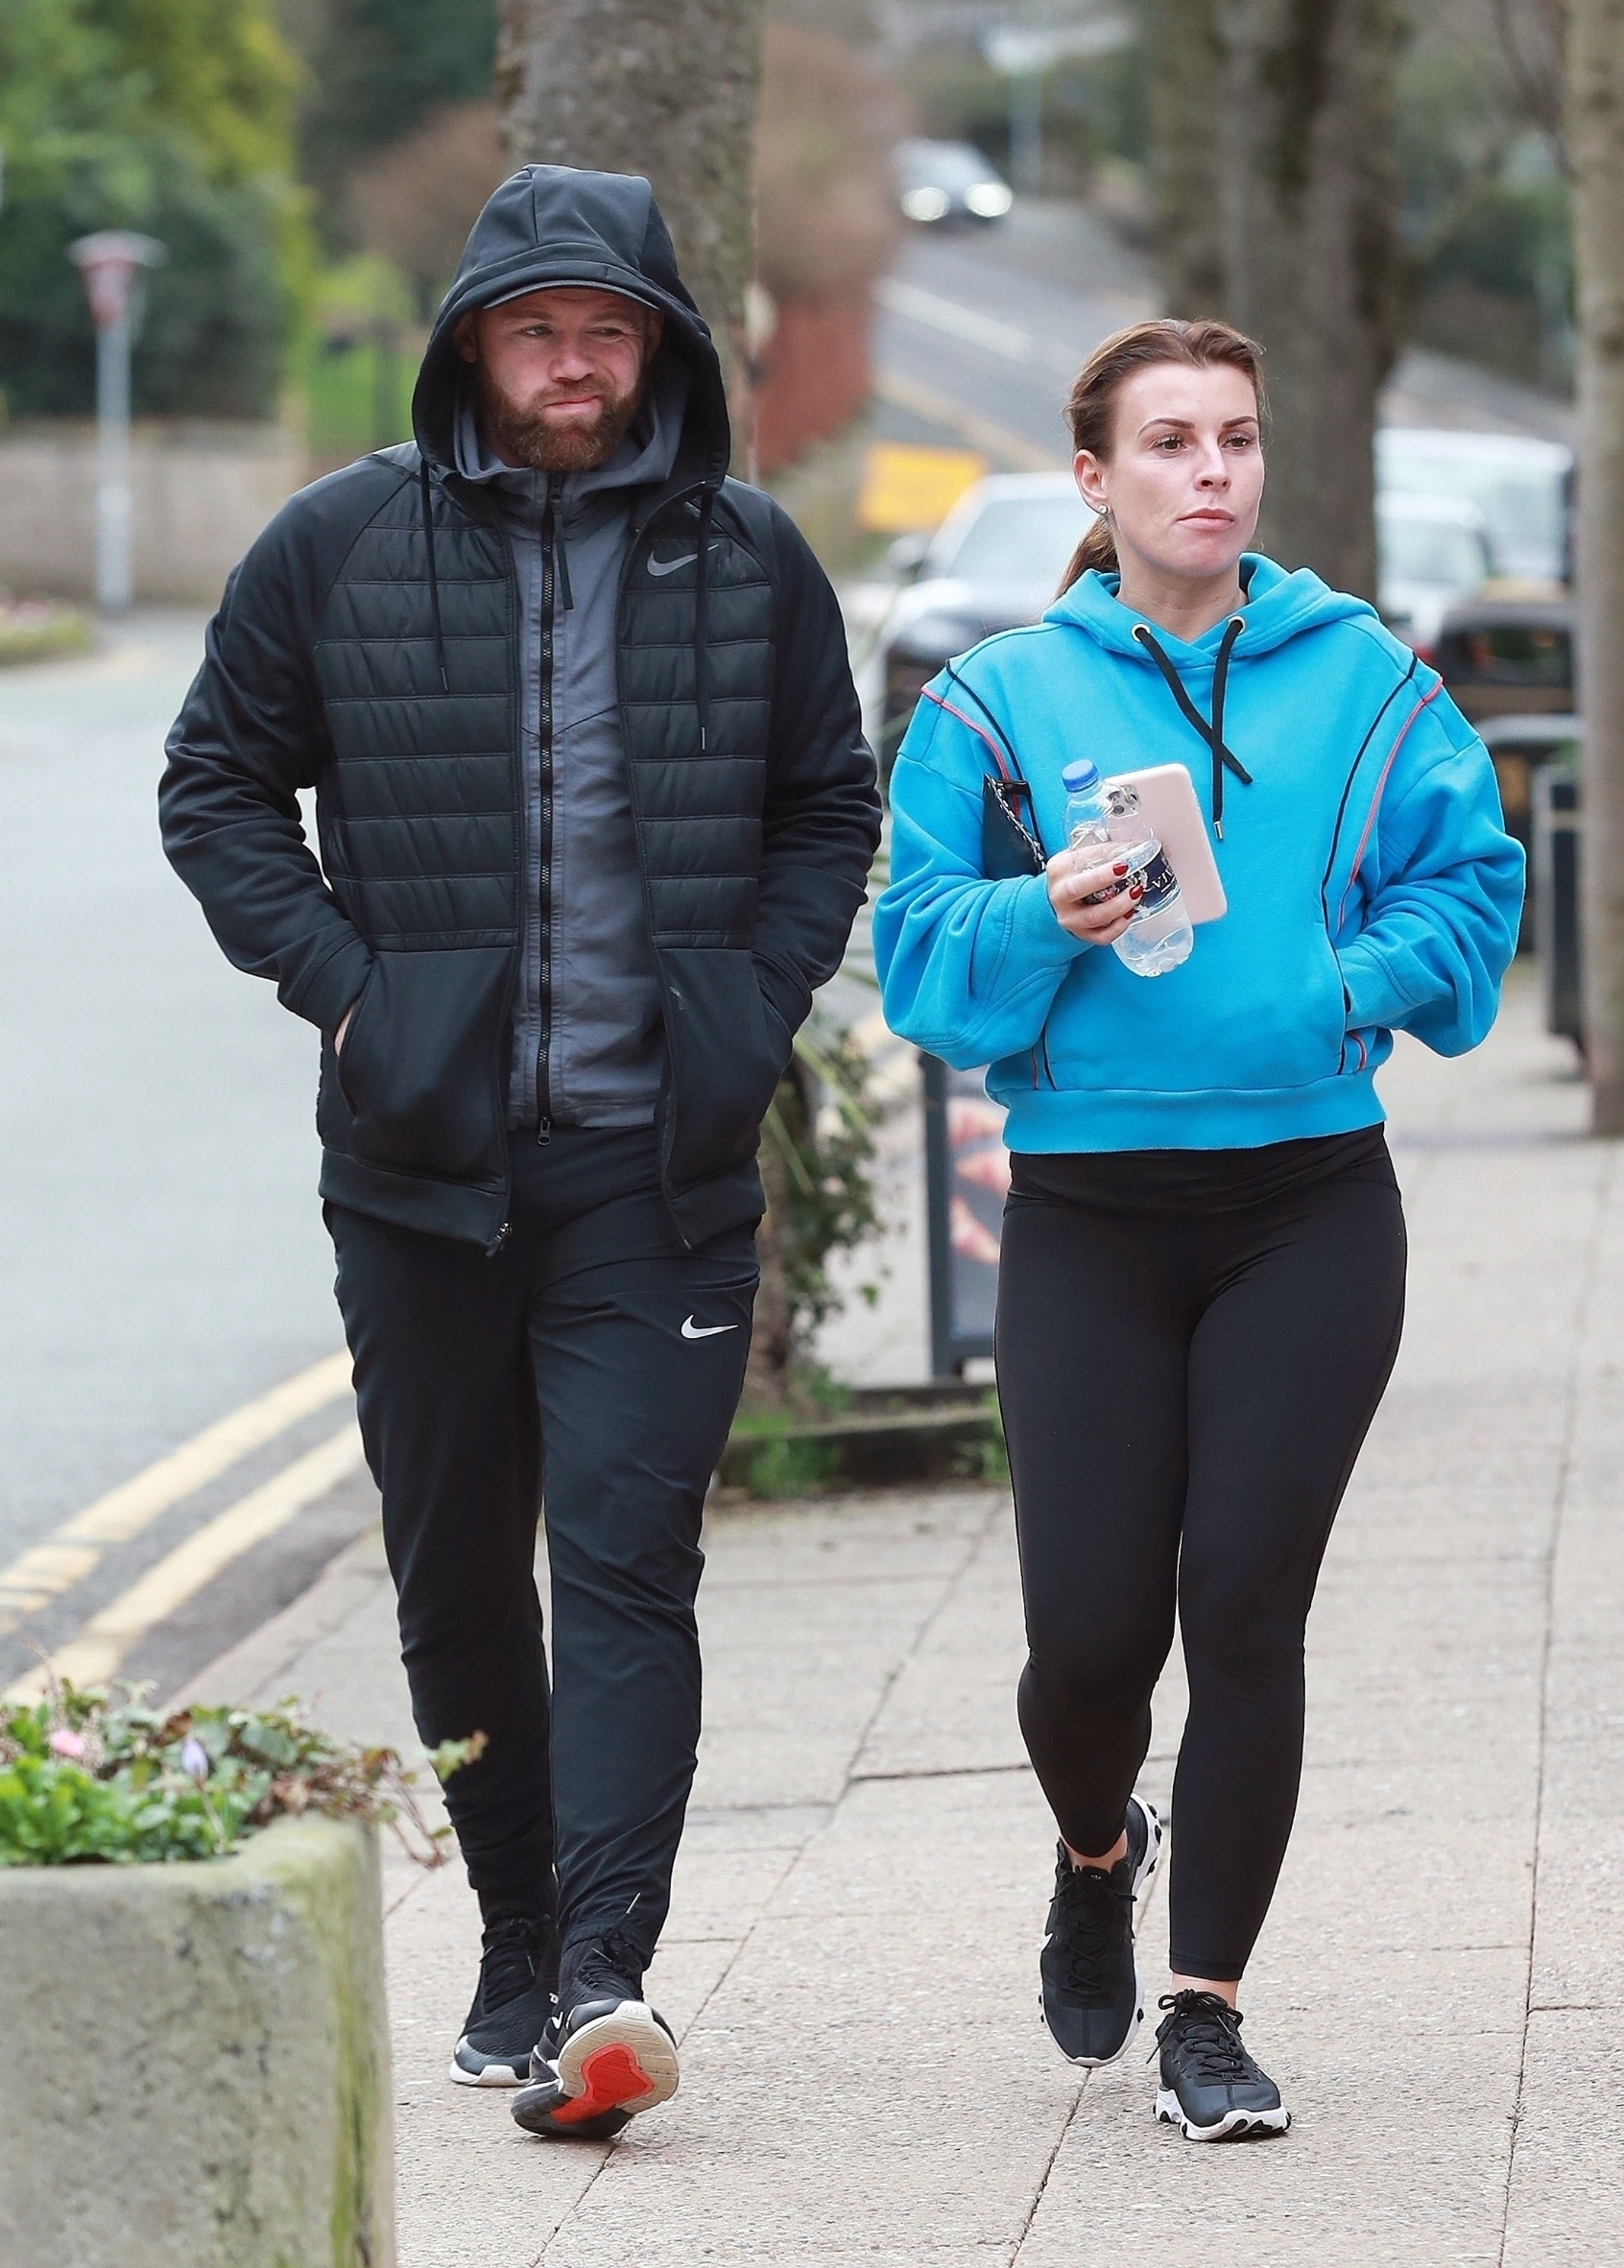 Cheshire, UNITED KINGDOM  - *EXCLUSIVE*  - **STRICTLY NOT AVAILABLE FOR MAIL ONLINE**

Former England International Footballer Wayne Rooney who now applies his trade at the Championship side Derby County is spotted out with his wife Coleen taking a stroll around Alderley Edge. 

Coleen looked sporty in her gym gear wearing black leggings and a blue hooded top holding a bottle of water in hand as a bearded Wayne wore a black hooded Nike jacket.

BACKGRID UK 17 FEBRUARY 2020, Image: 499058750, License: Rights-managed, Restrictions: , Model Release: no, Credit line: Stephen Crawshaw / BACKGRID / Backgrid UK / Profimedia